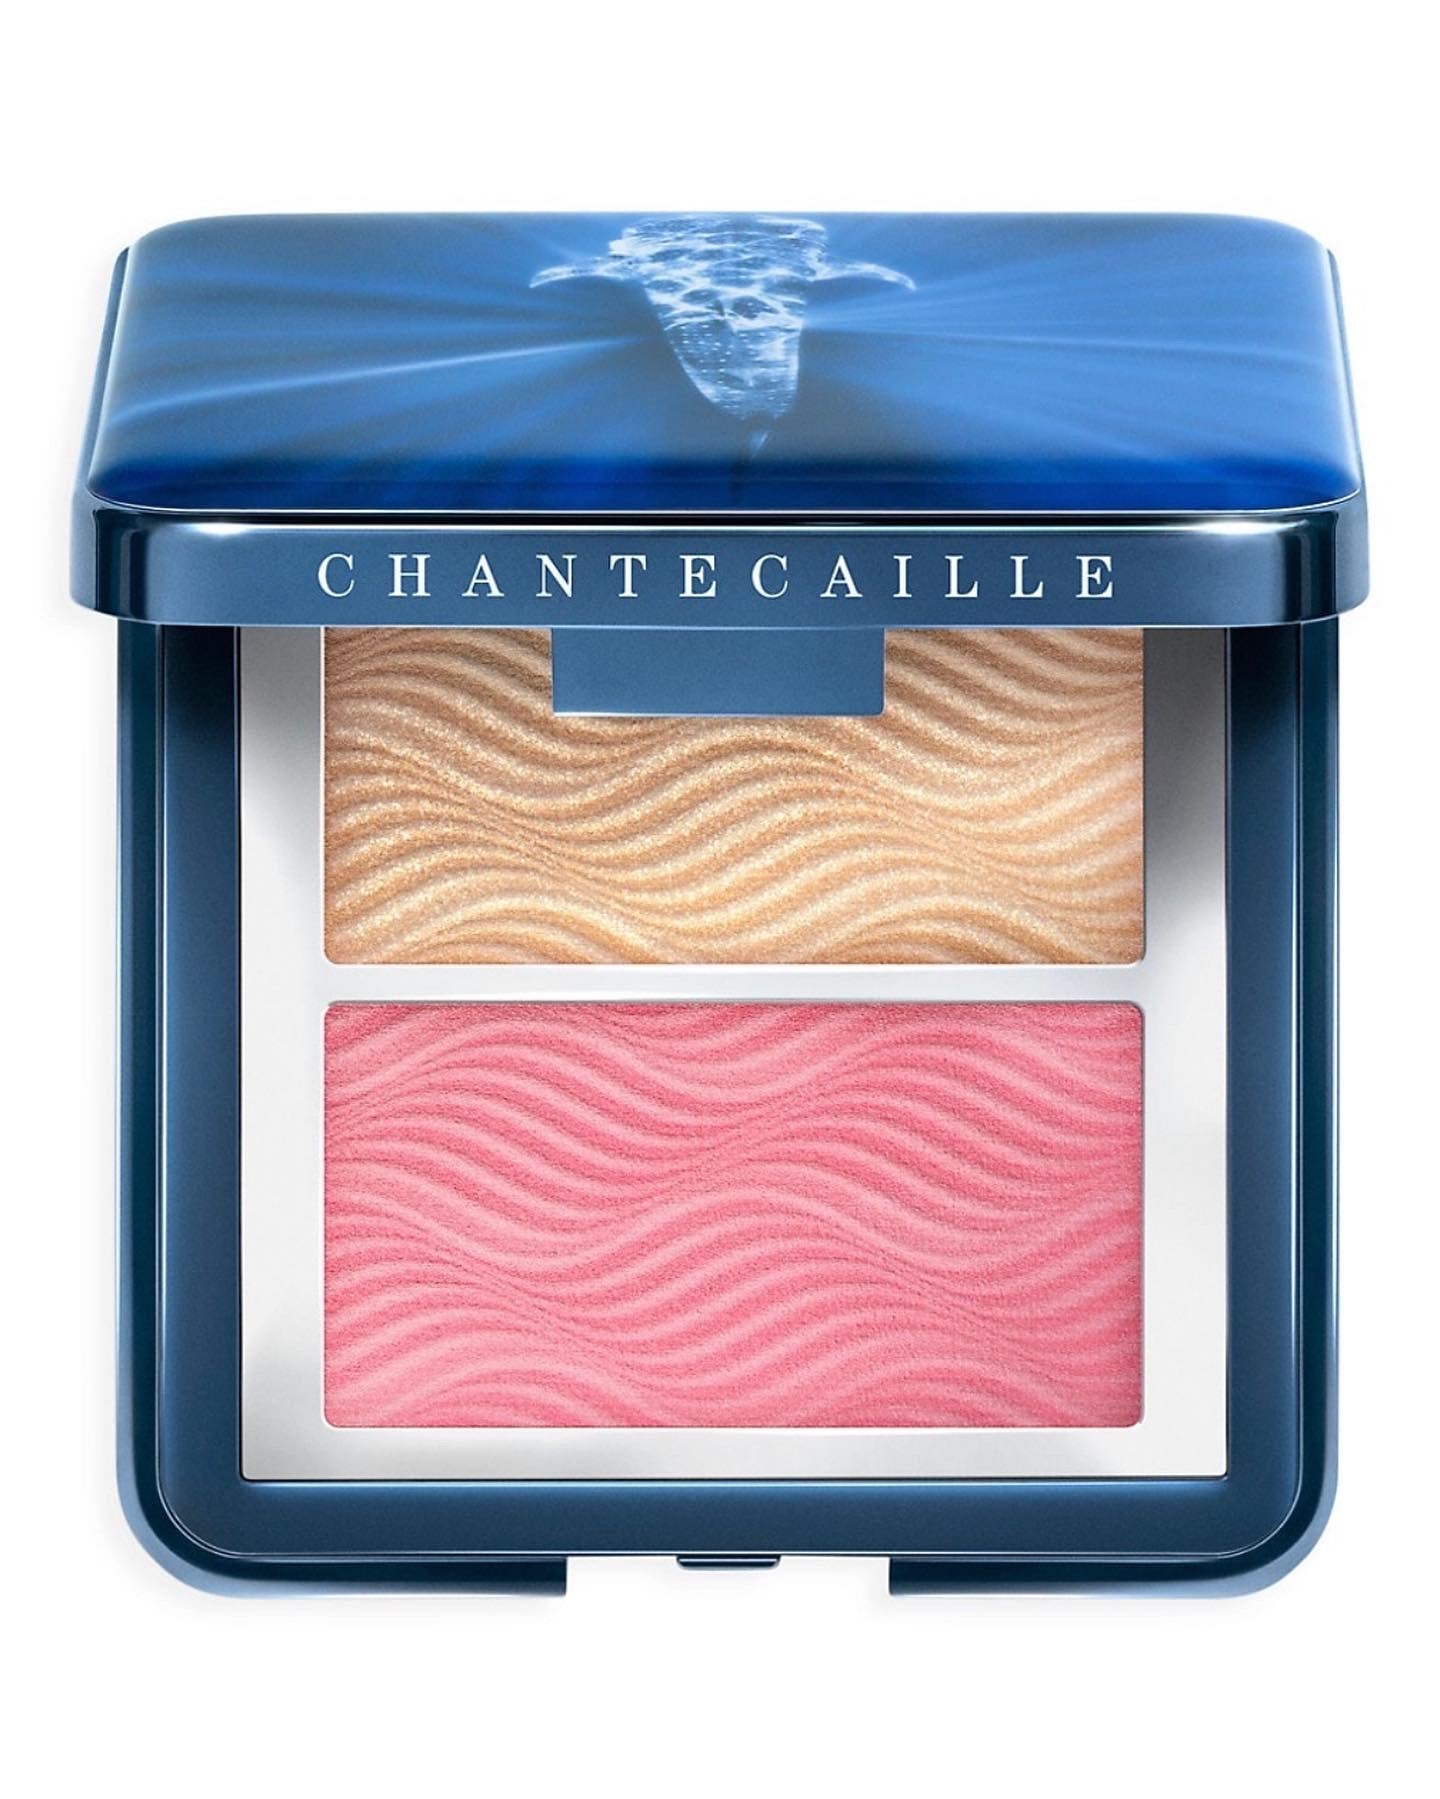 CHANTECAILLE, ROSE RADIANCE CHIC CHEEK & HIGHLIGHTER DUO